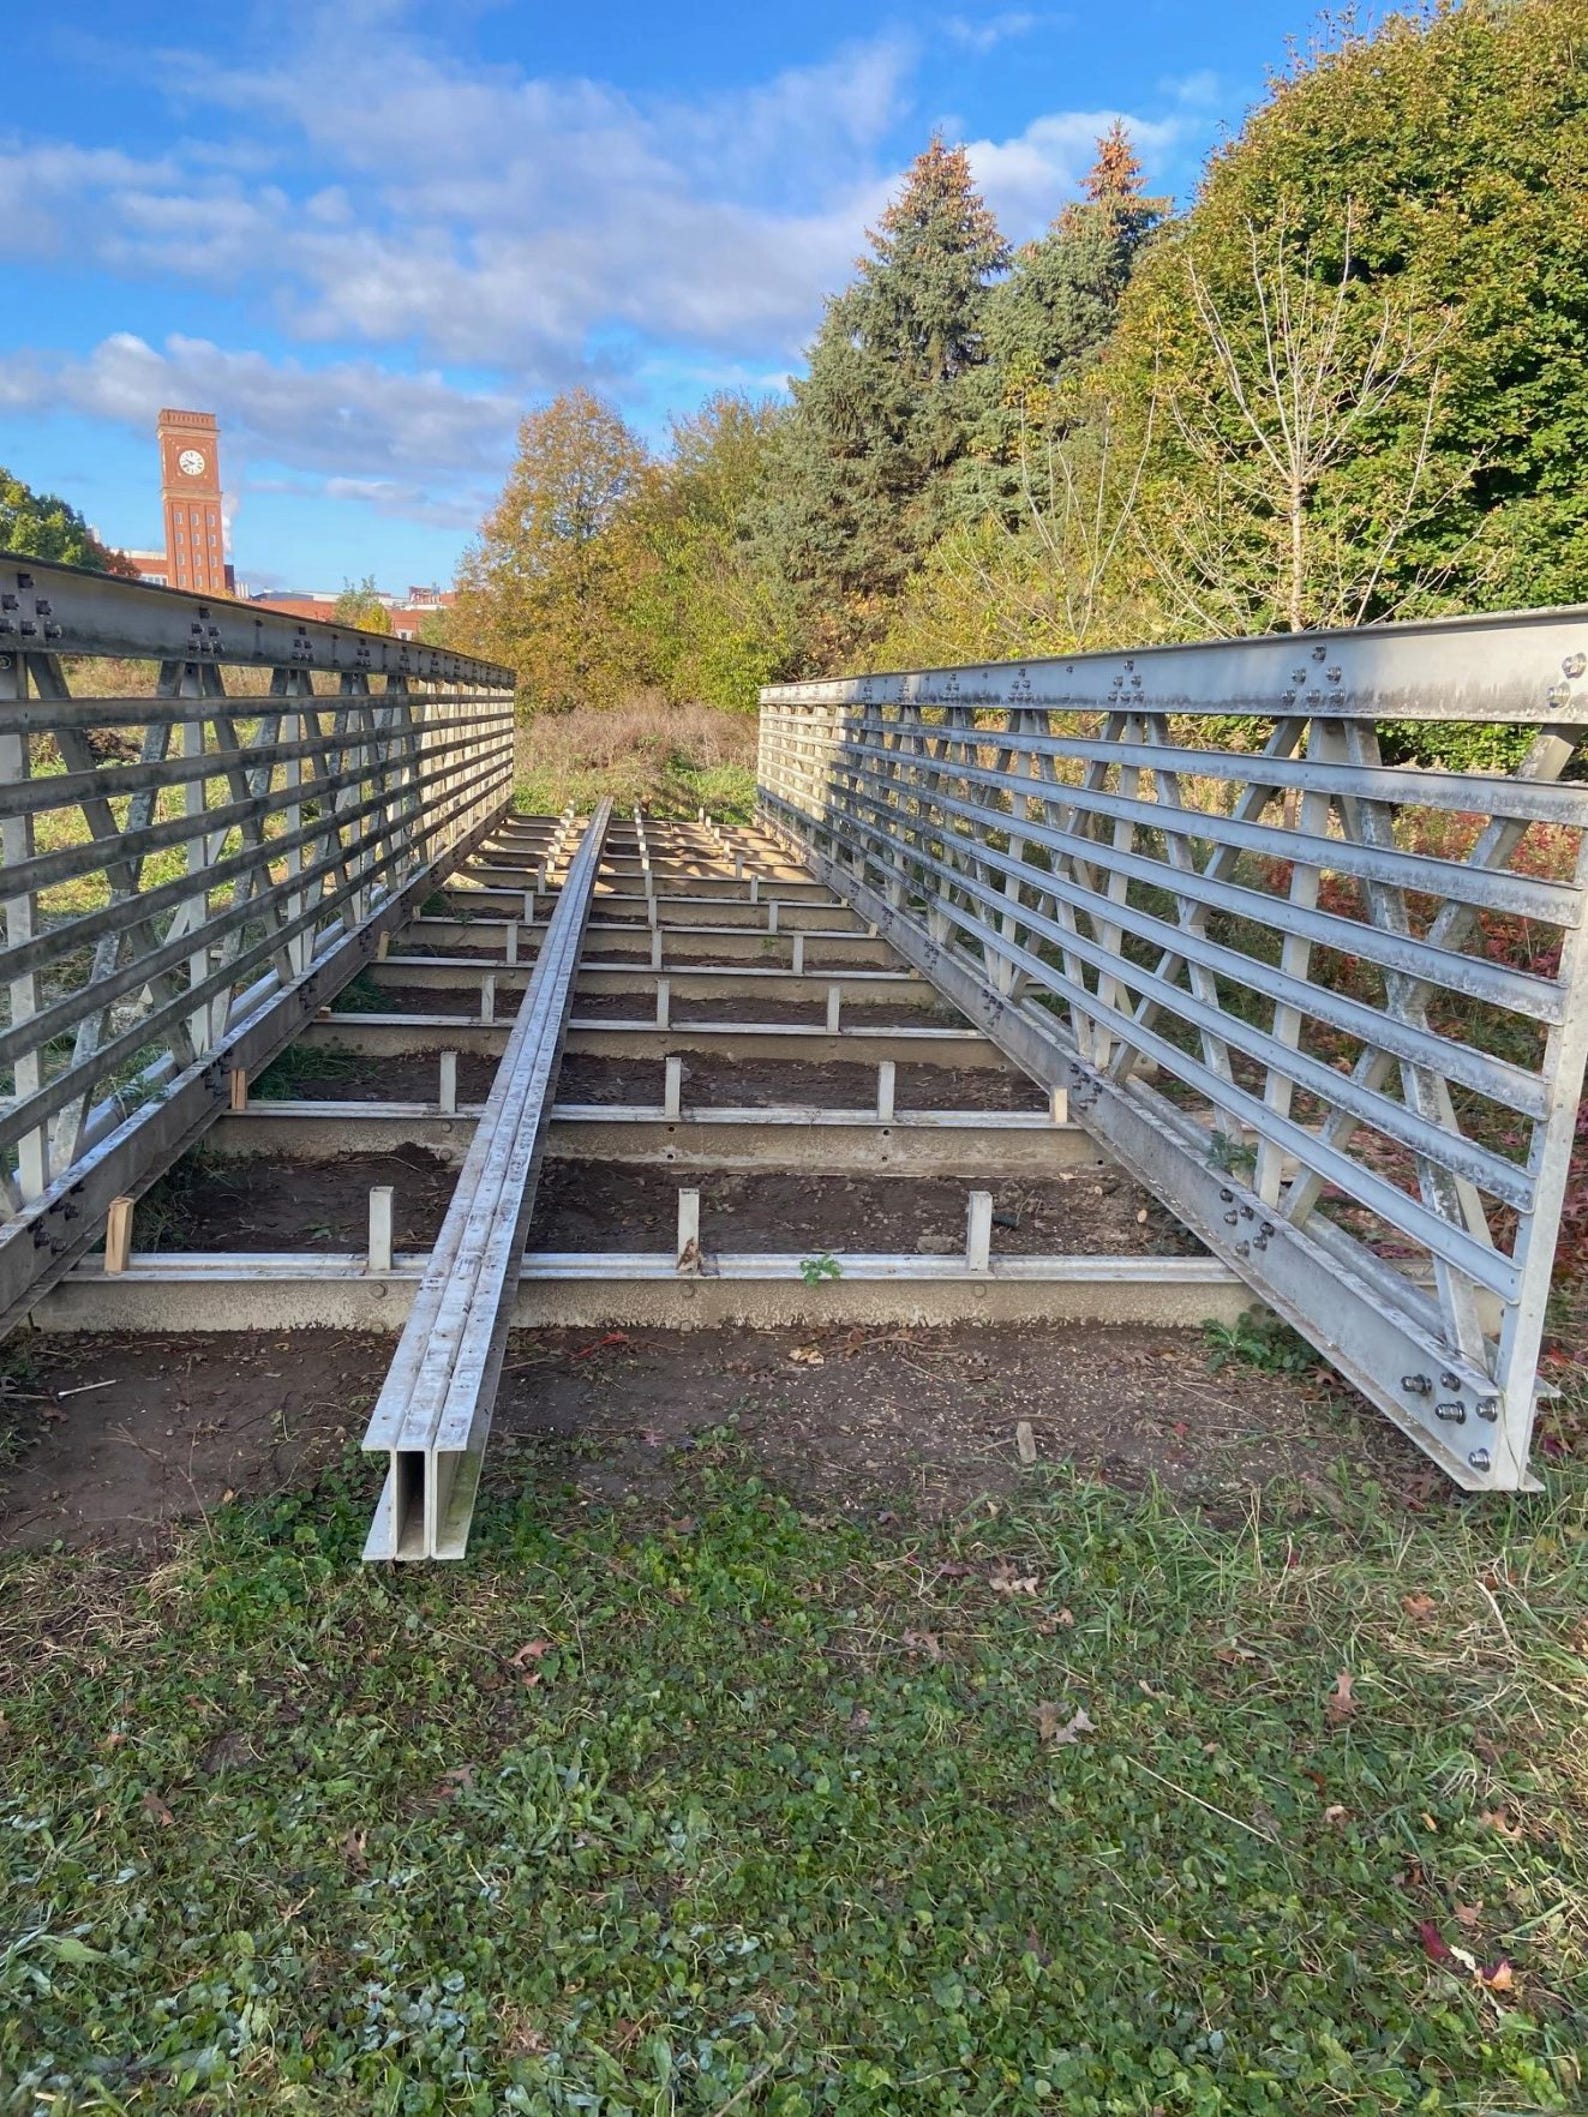 The metal frame of this 58-foot bridge was found to be missing on Nov. 11, about a week after the deck boards had been stolen,